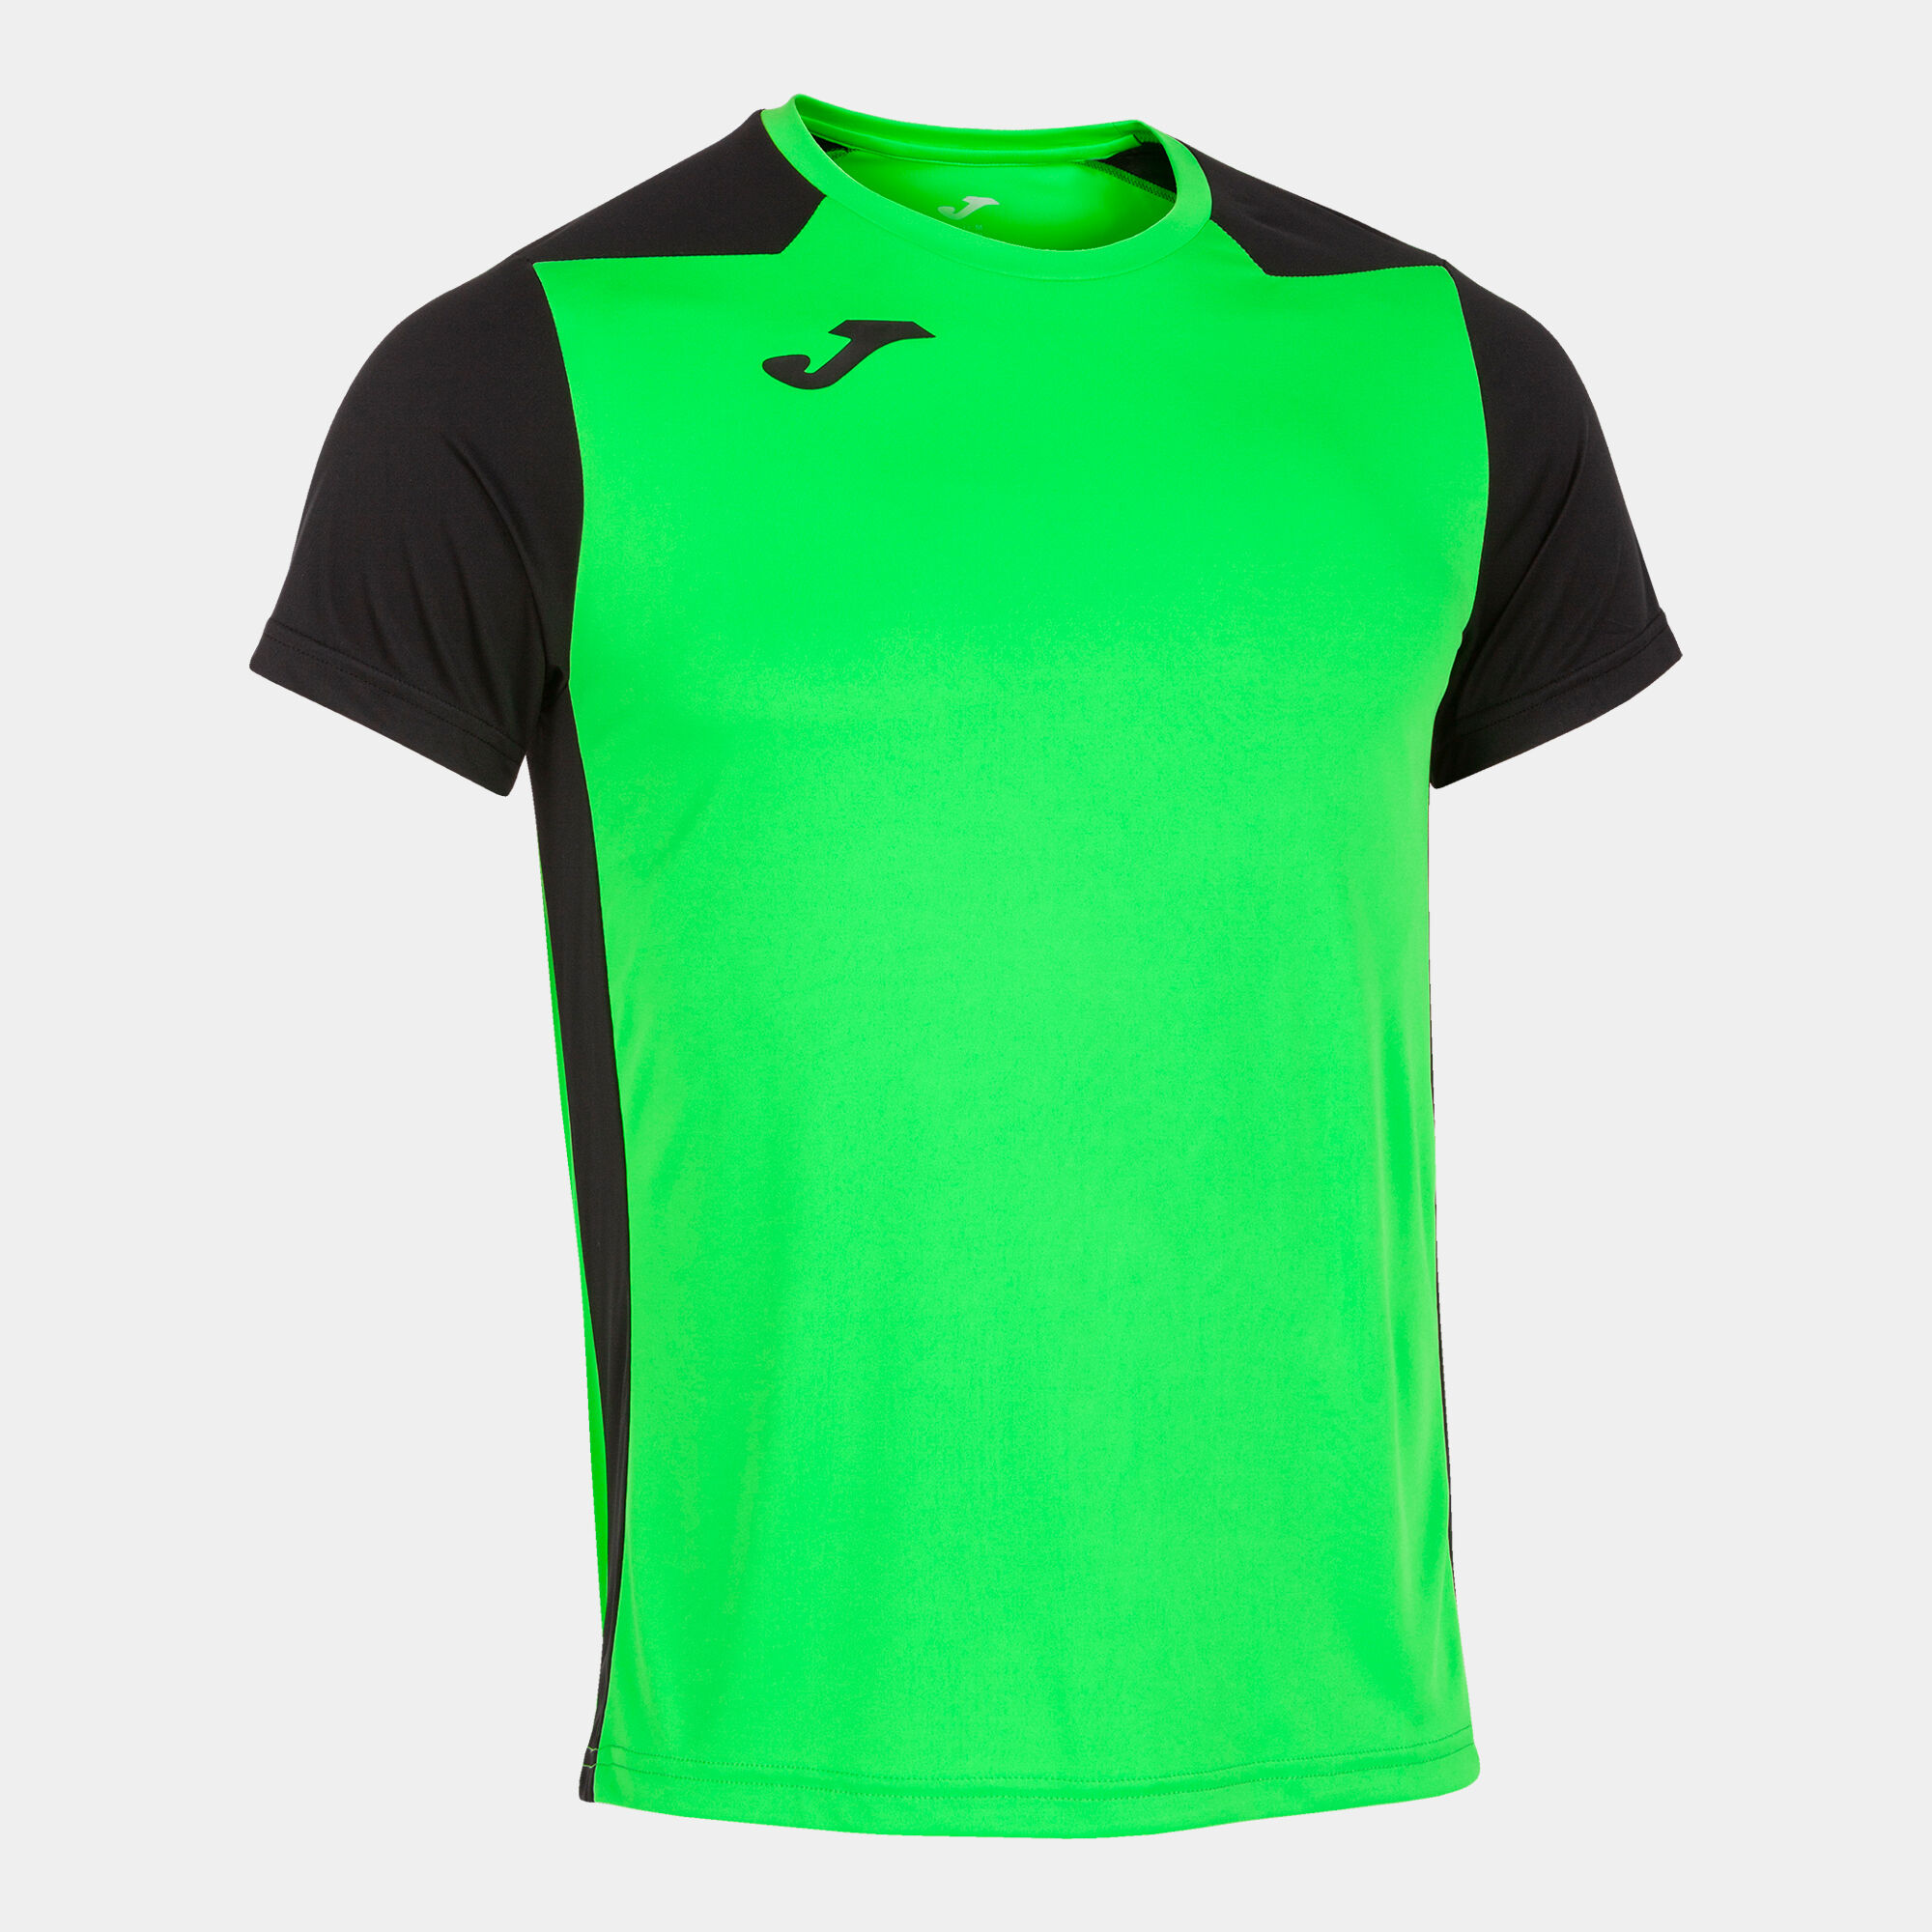 MAILLOT MANCHES COURTES HOMME RECORD II VERT FLUO NOIR